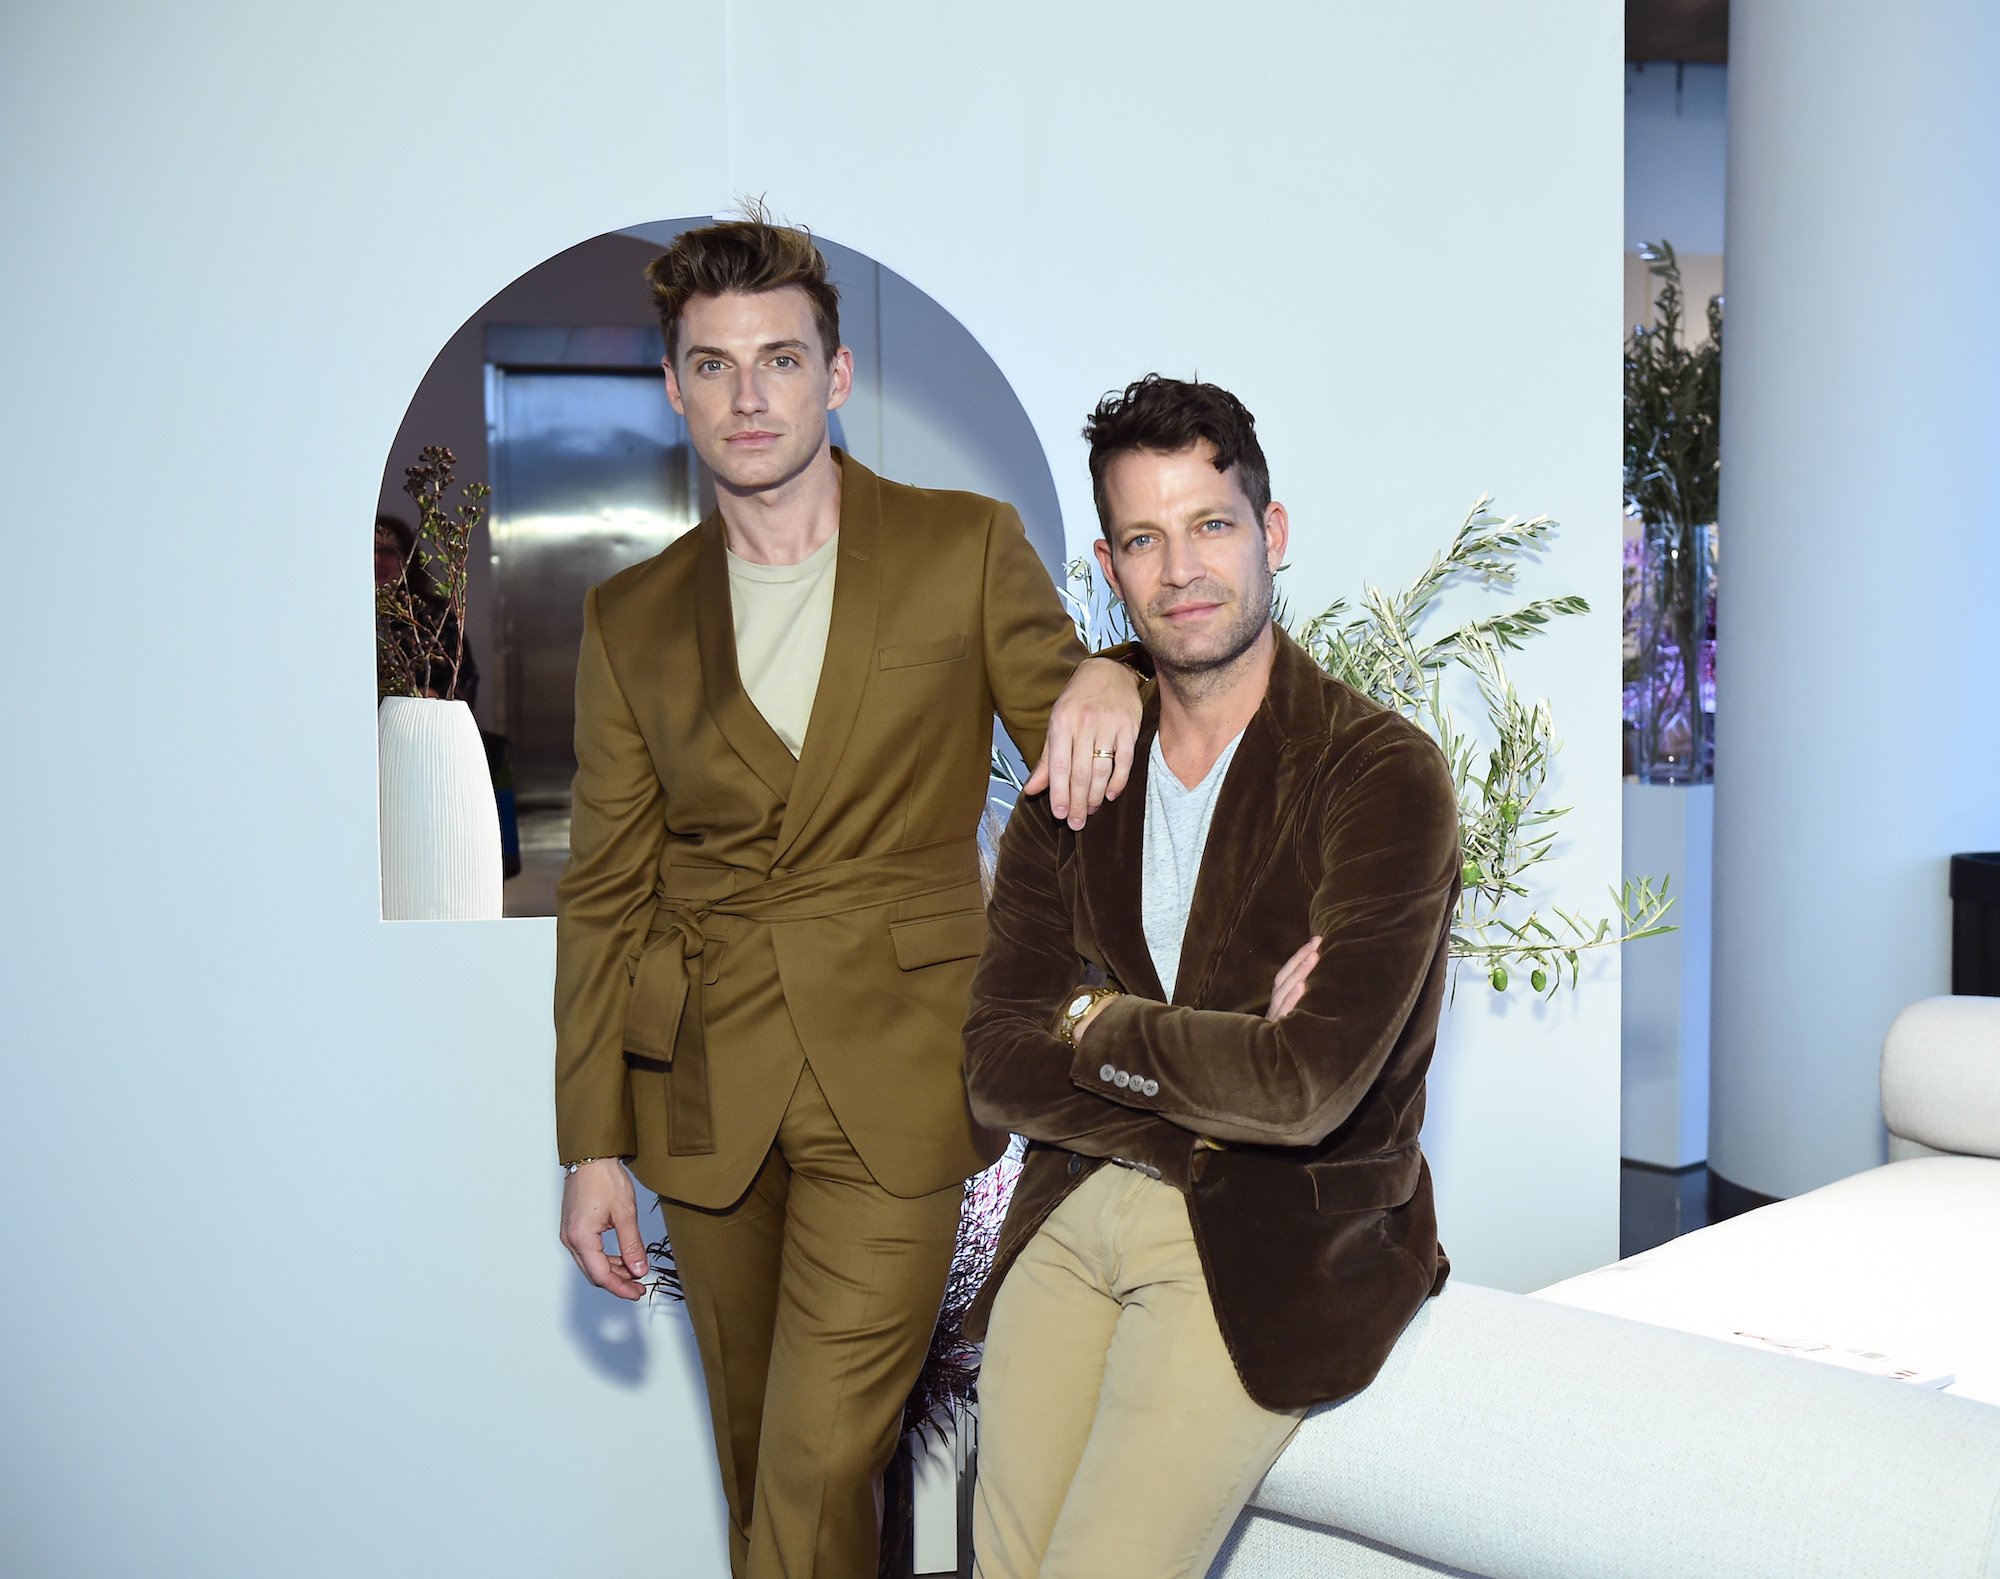 (L-R) Jeremiah Brent and Nate Berkus slightly smiling in a white room, leaning on a white couch